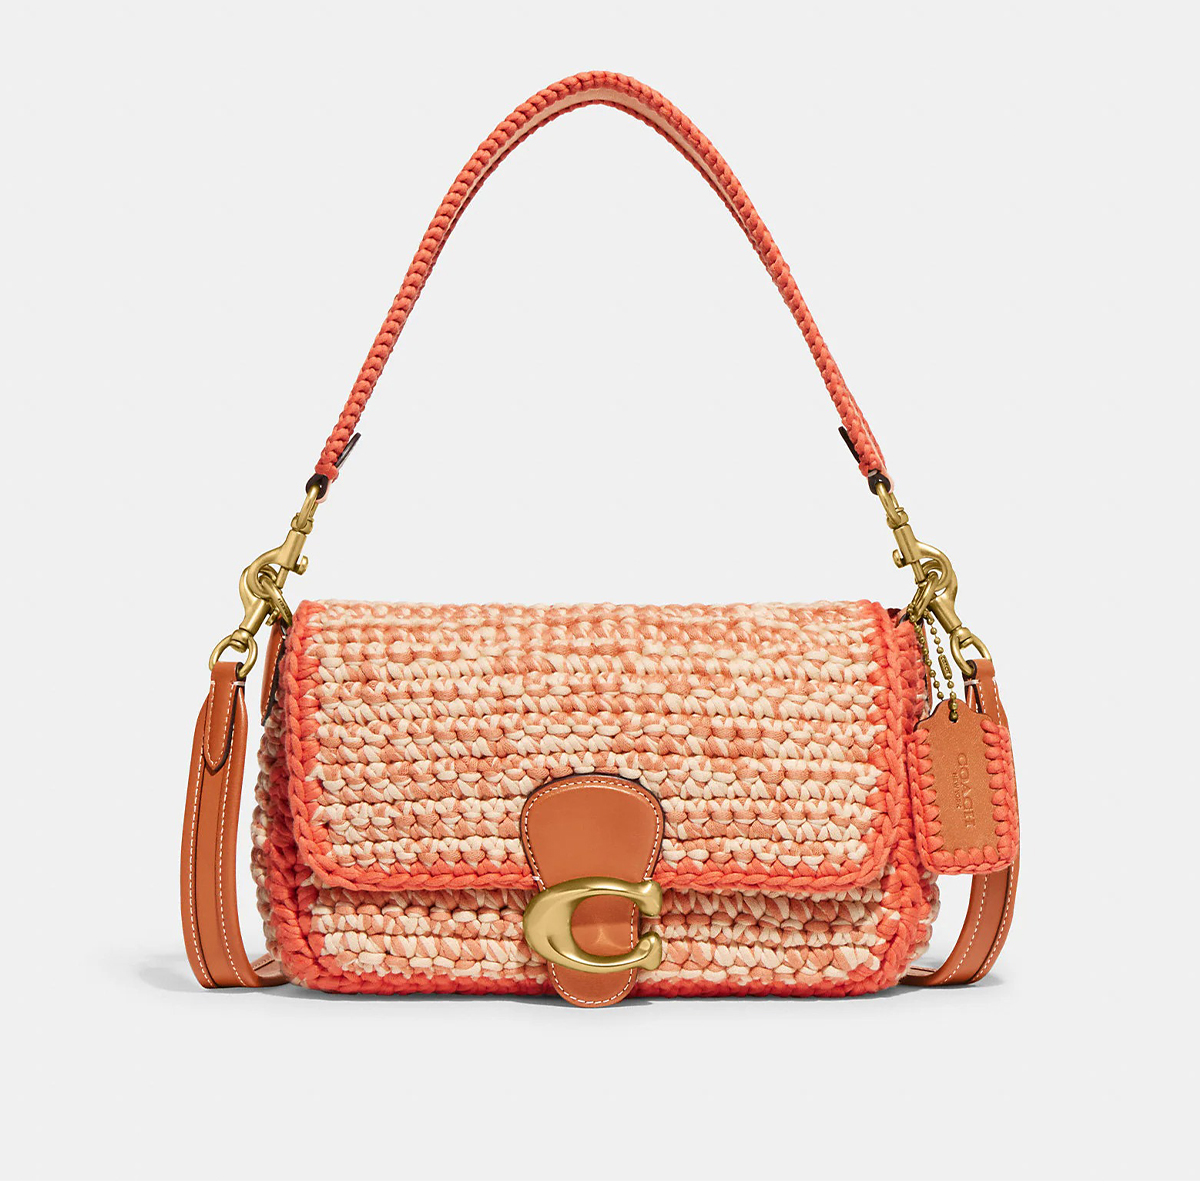 I'm Eyeing These 16 Handbags From Coach's Summer Collection